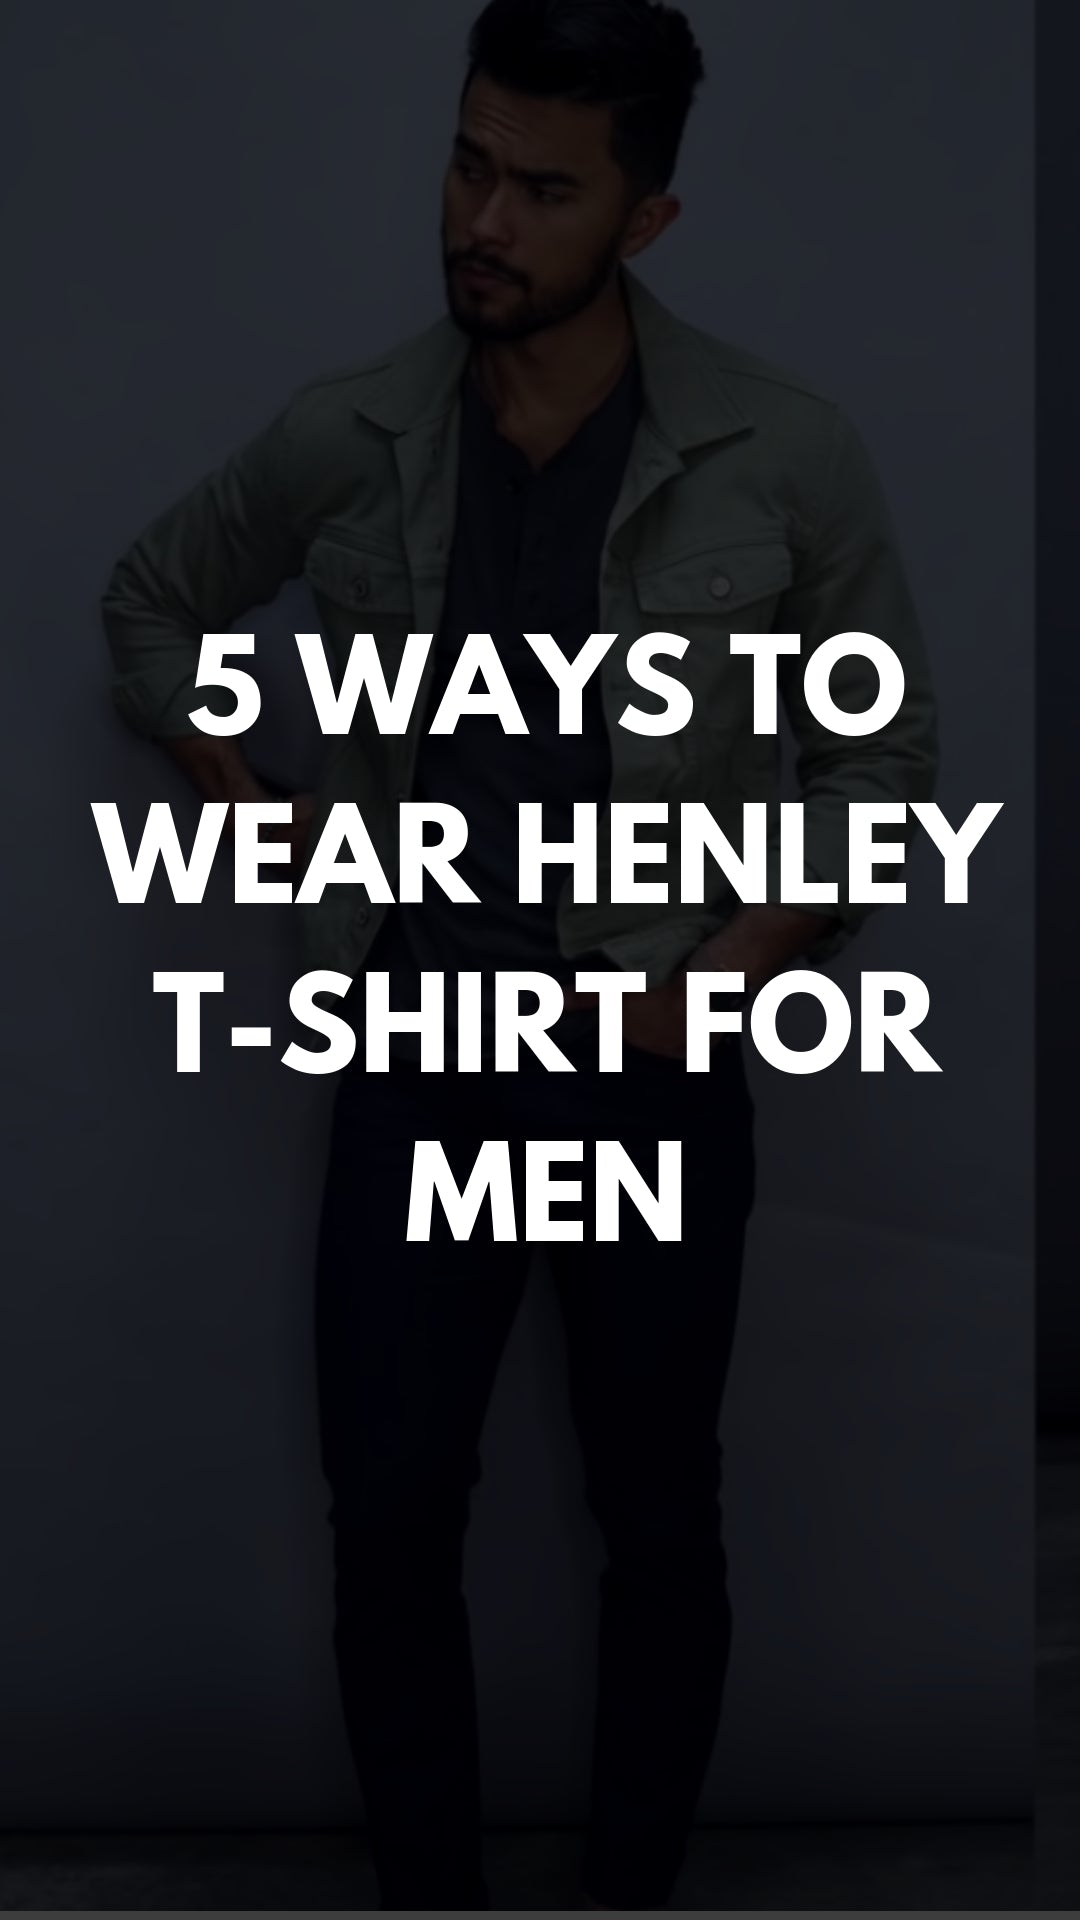 5 Henley T-shirt Outfits For Men #henley #-tshirt #outfits 